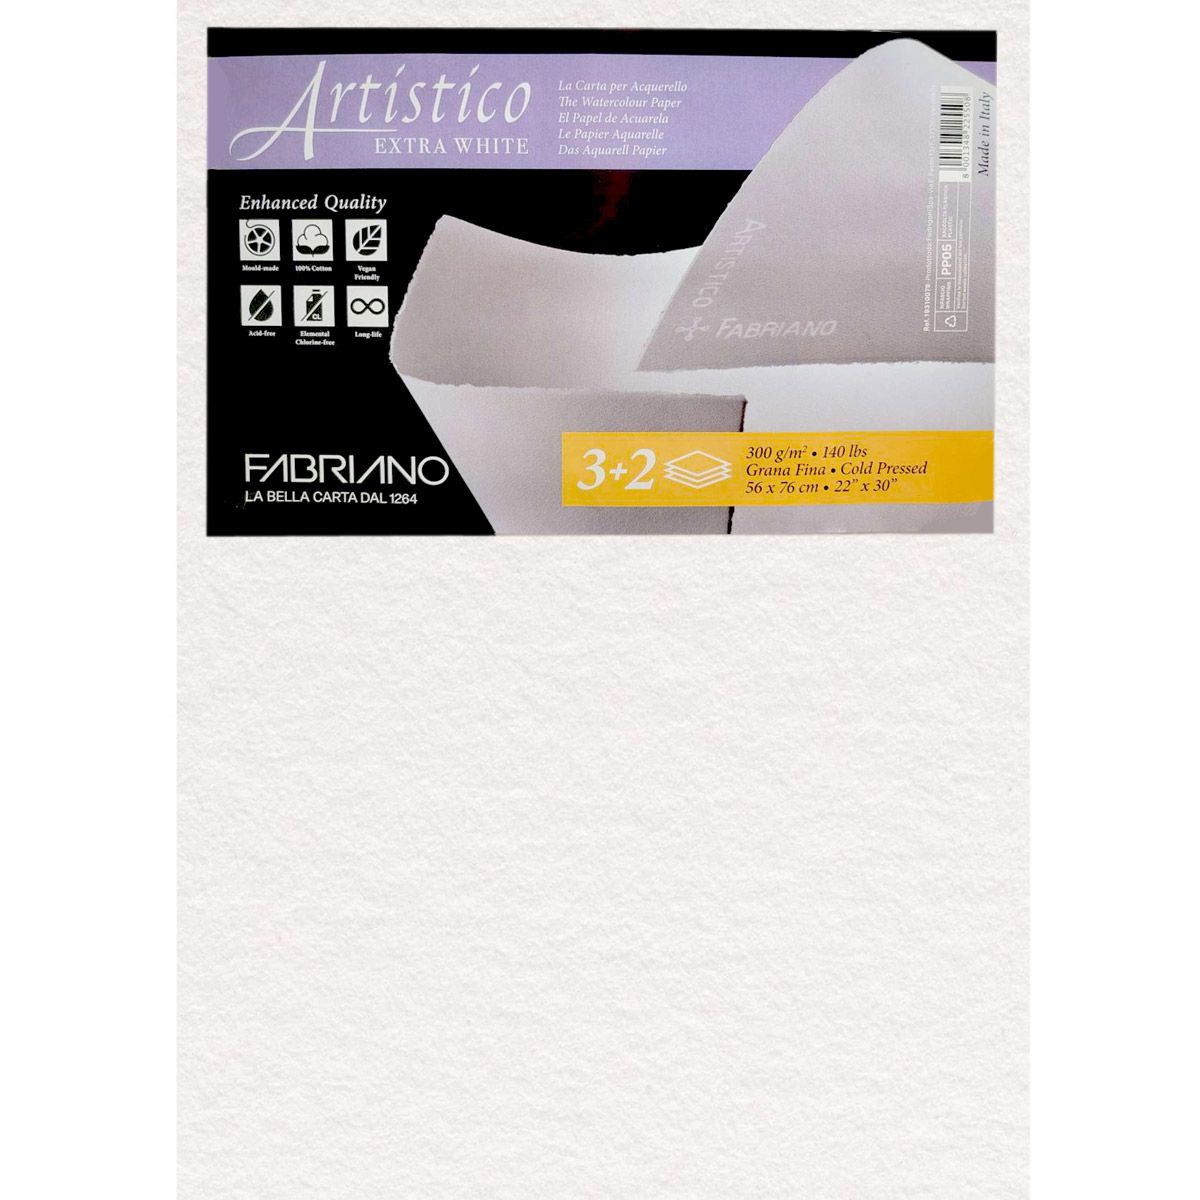 Fabriano Artistico Extra-White CP 140lbs 22”x30” Buy 3 Get 2 Free